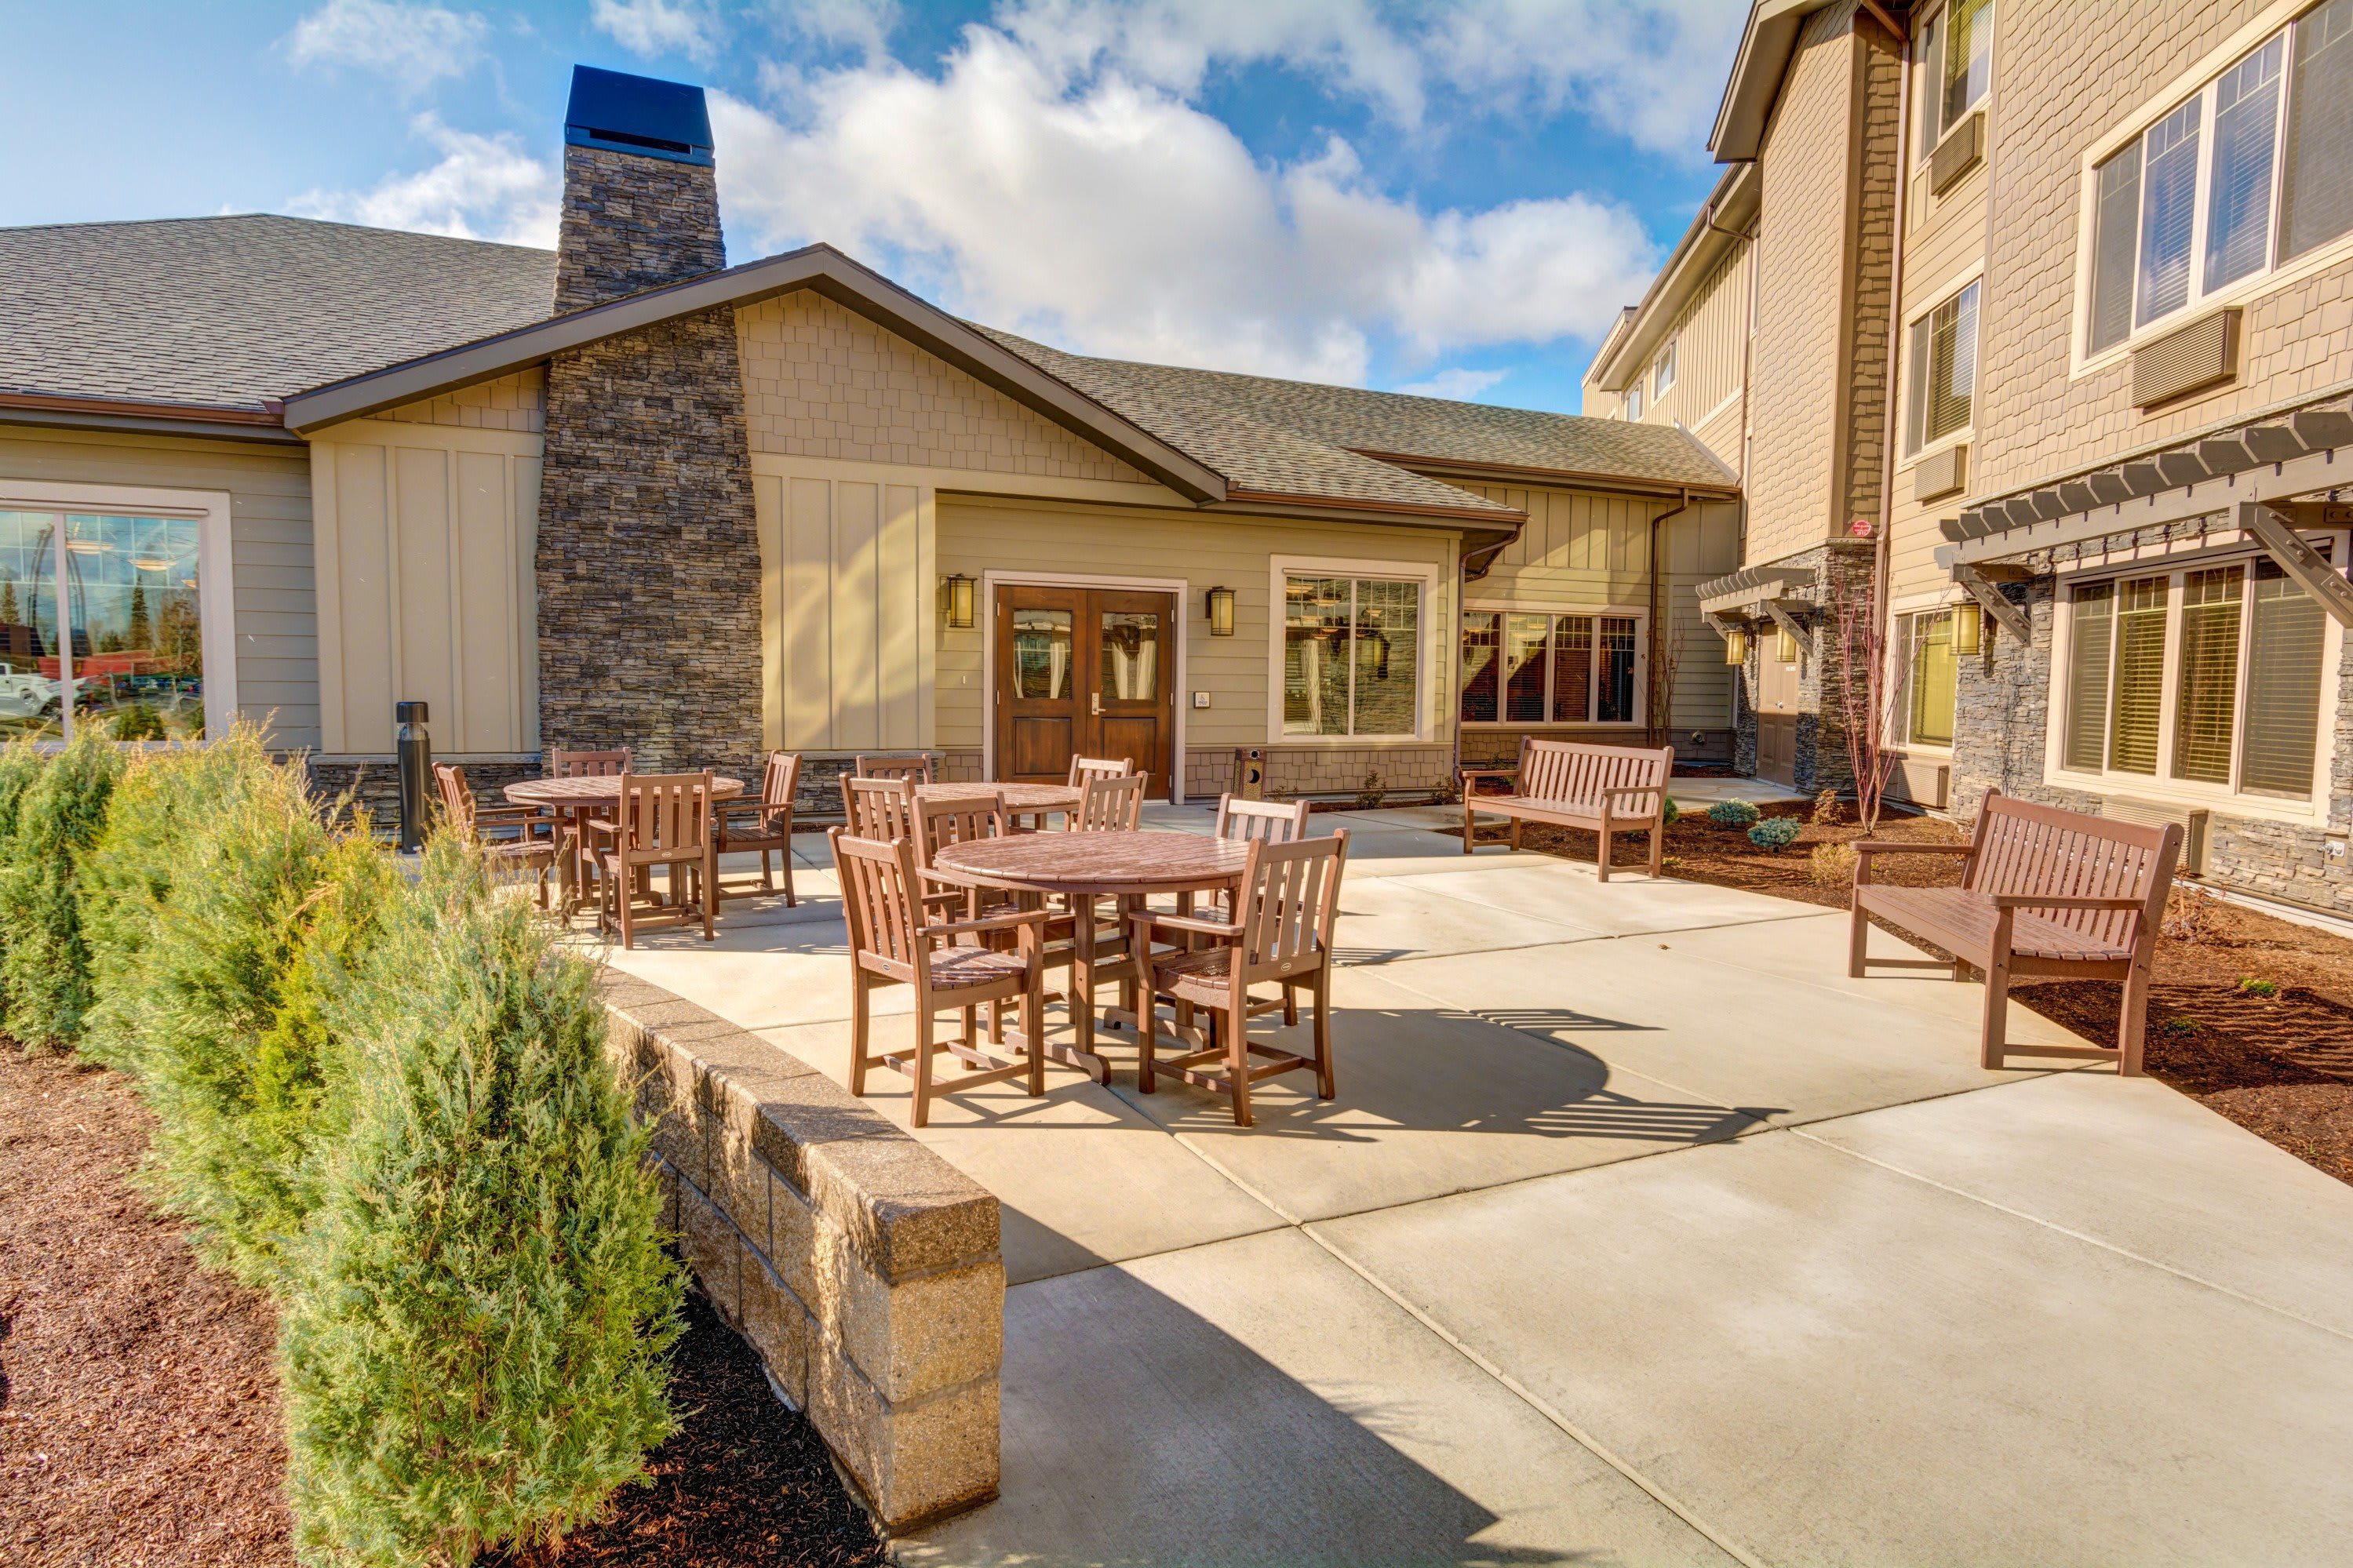 Mt. Bachelor Assisted Living and Memory Care patio